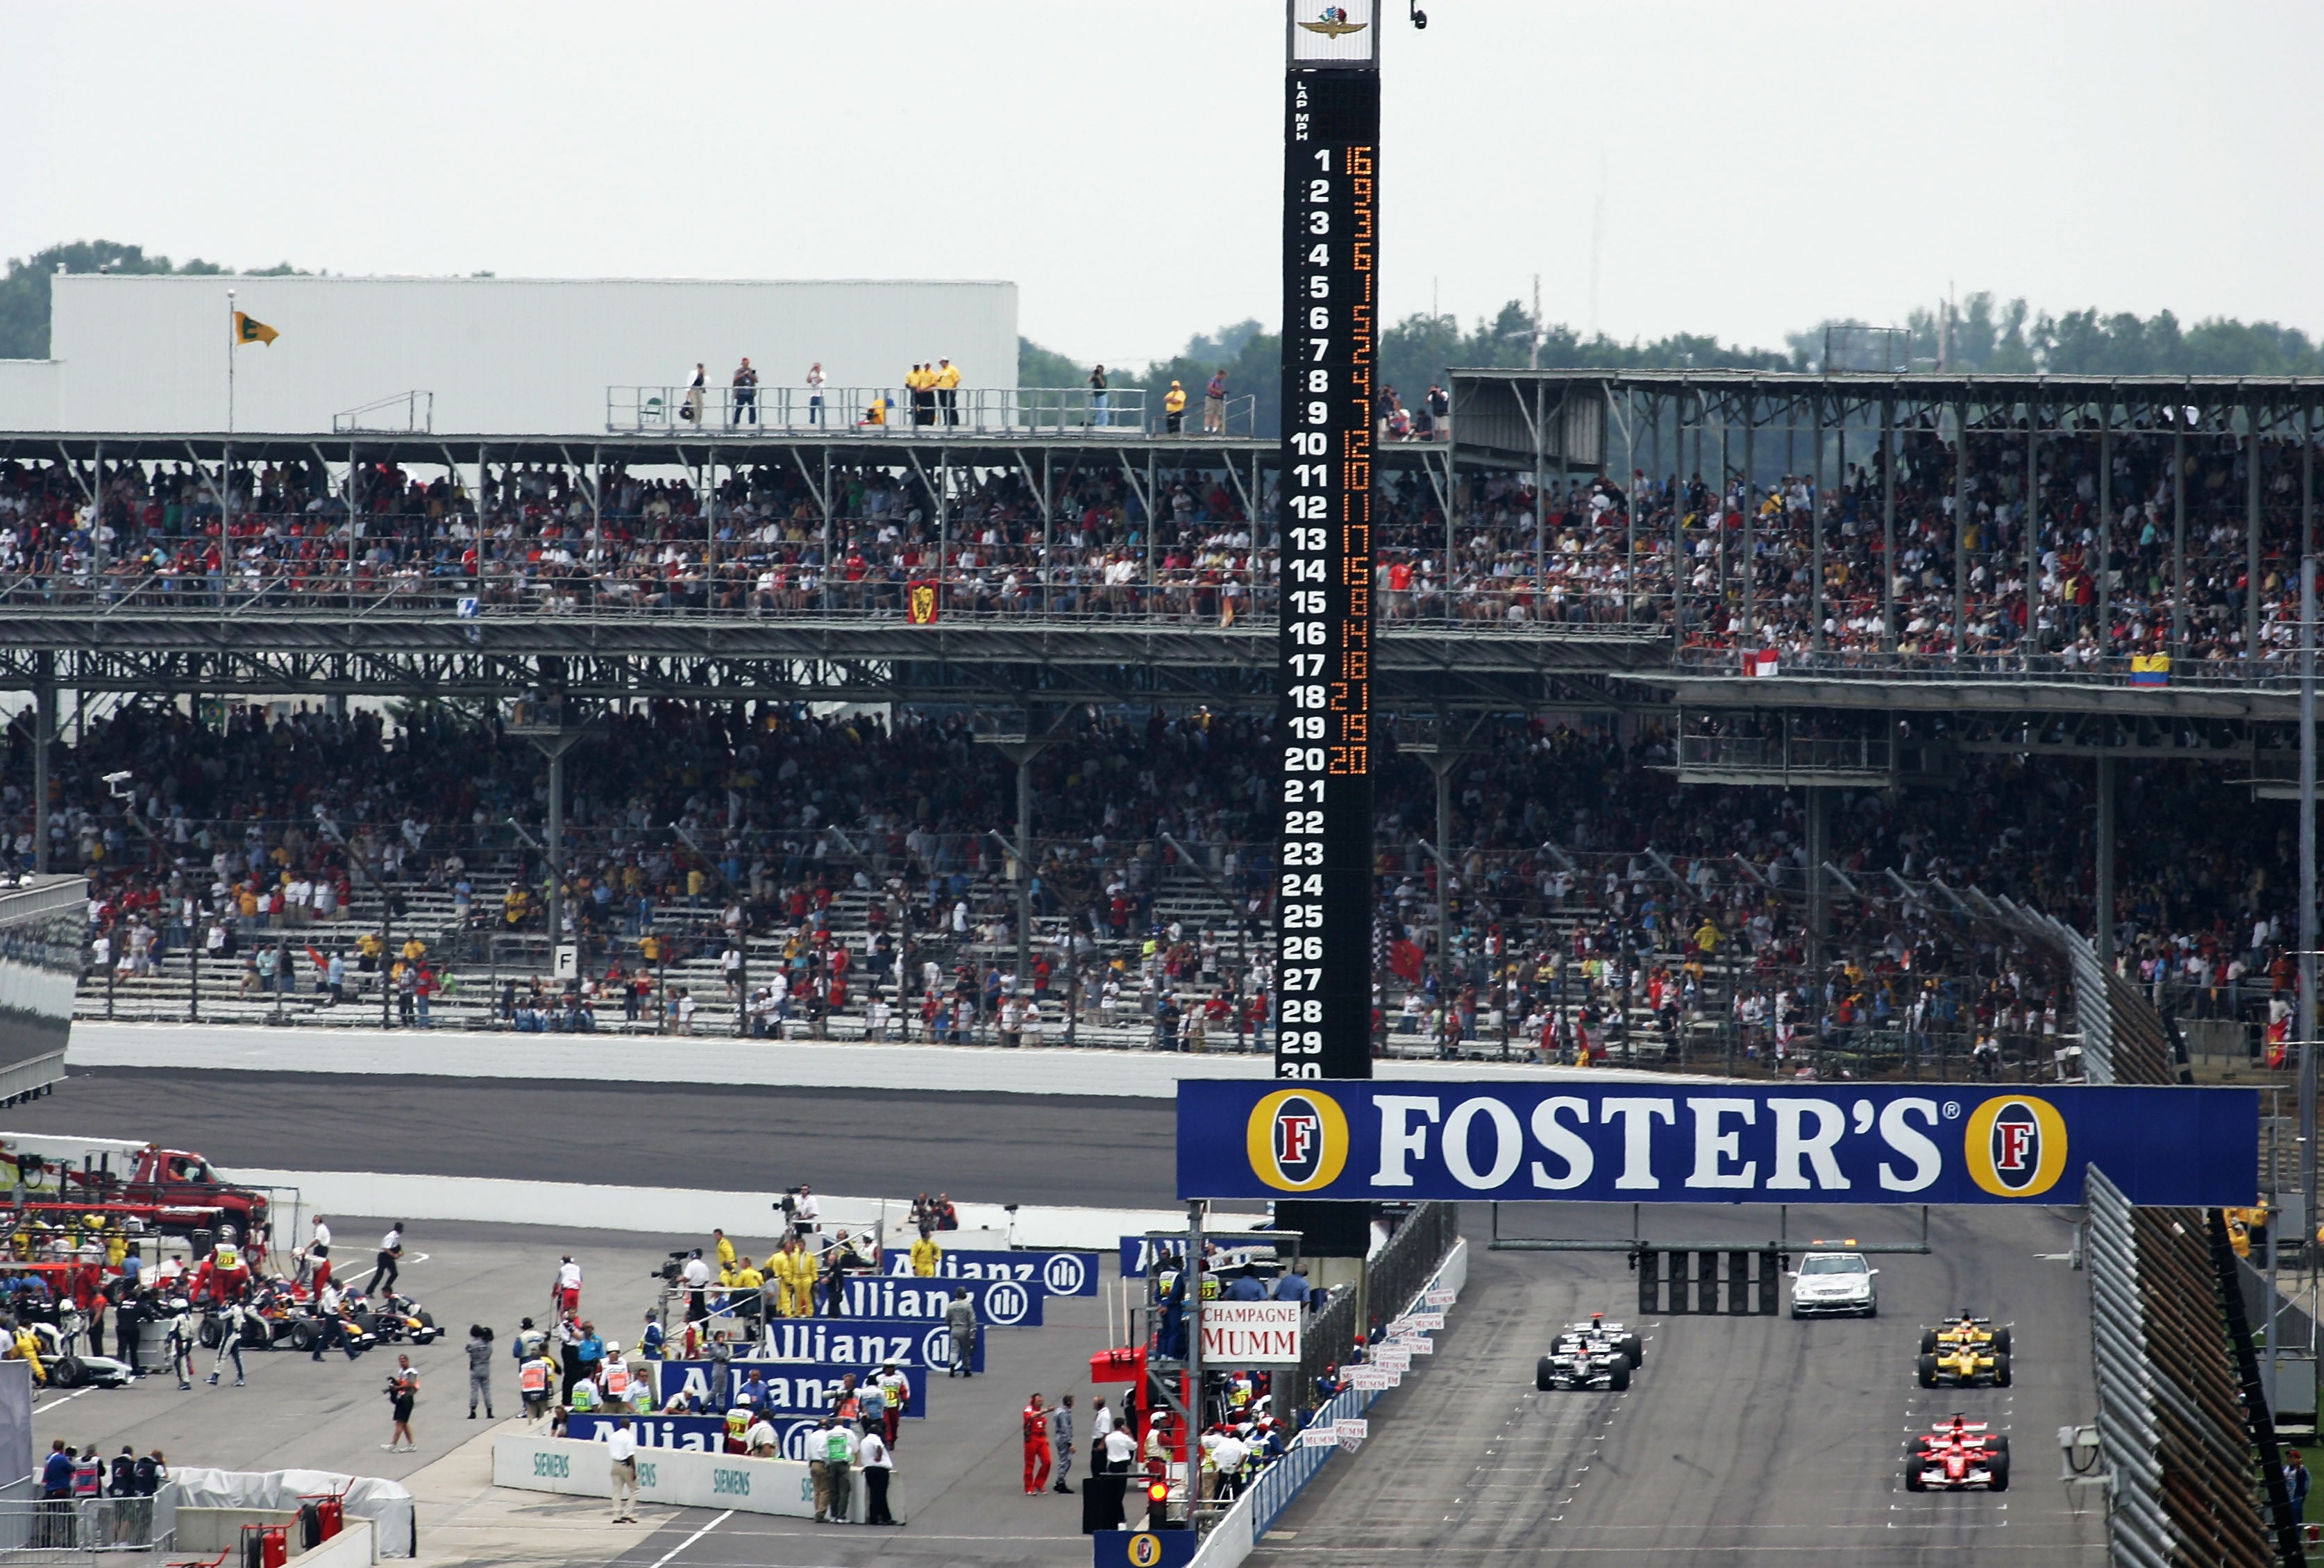 The 2005 United States Grand Prix turned into a farce when only six cars took to the start line